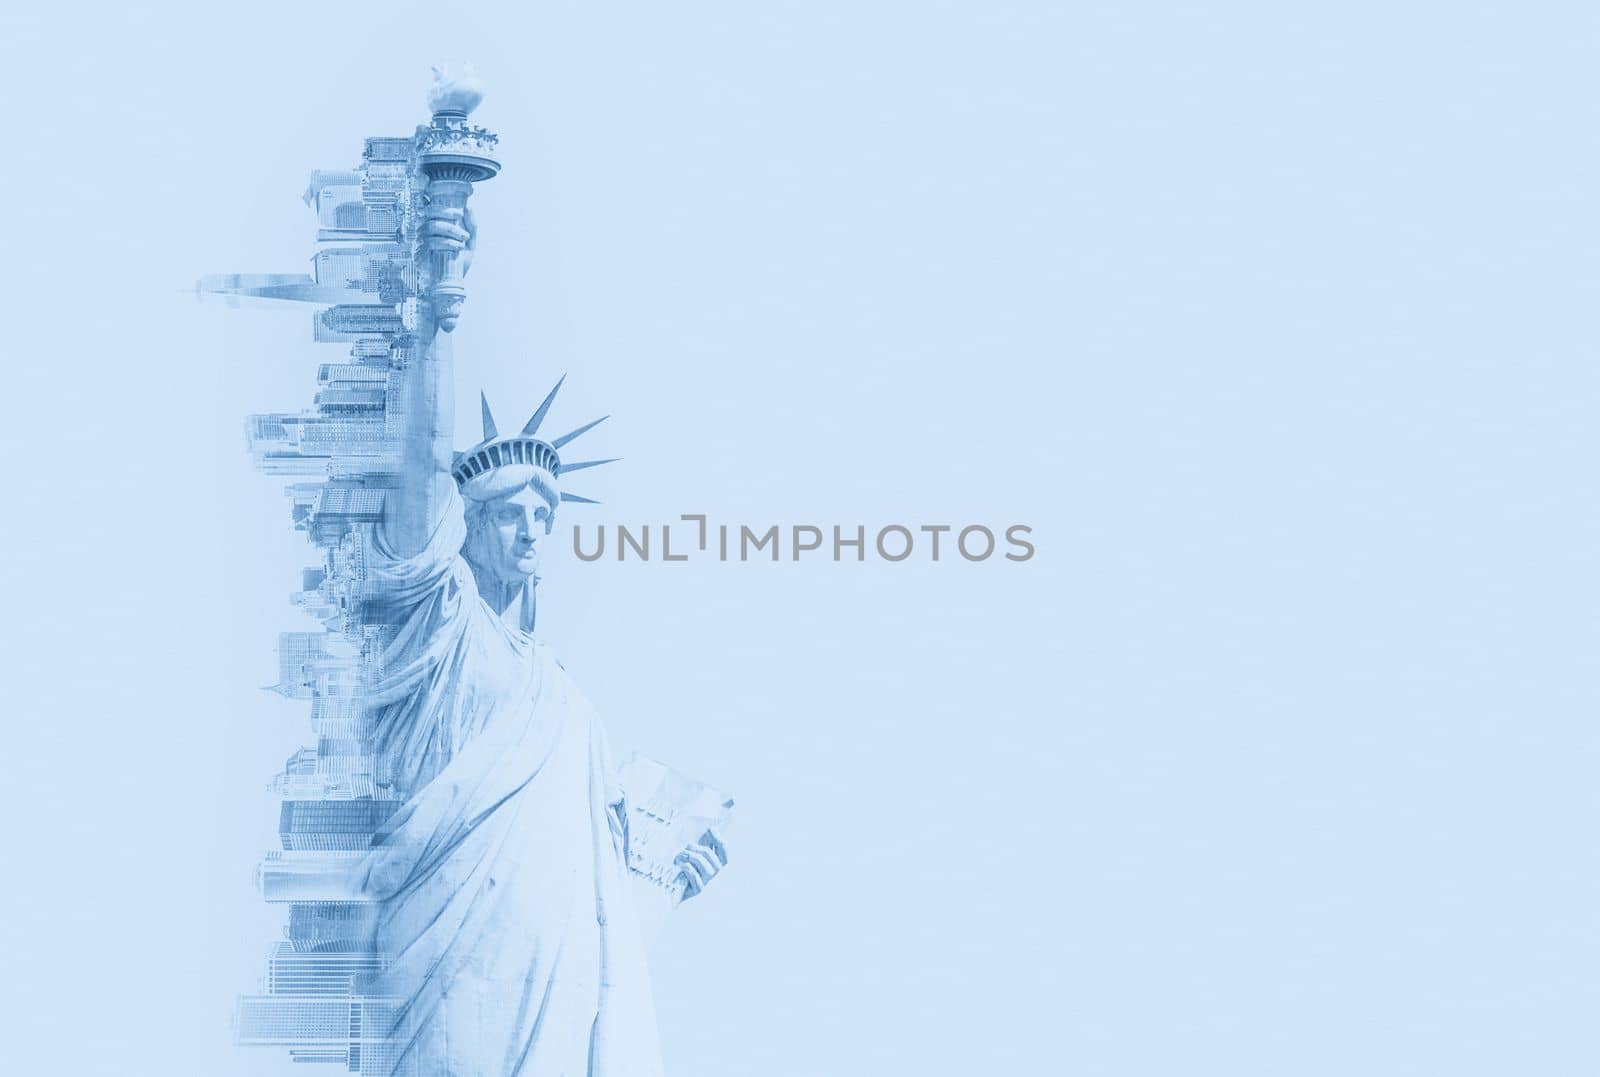 Double exposure image of the Statue of Liberty and new york skyline